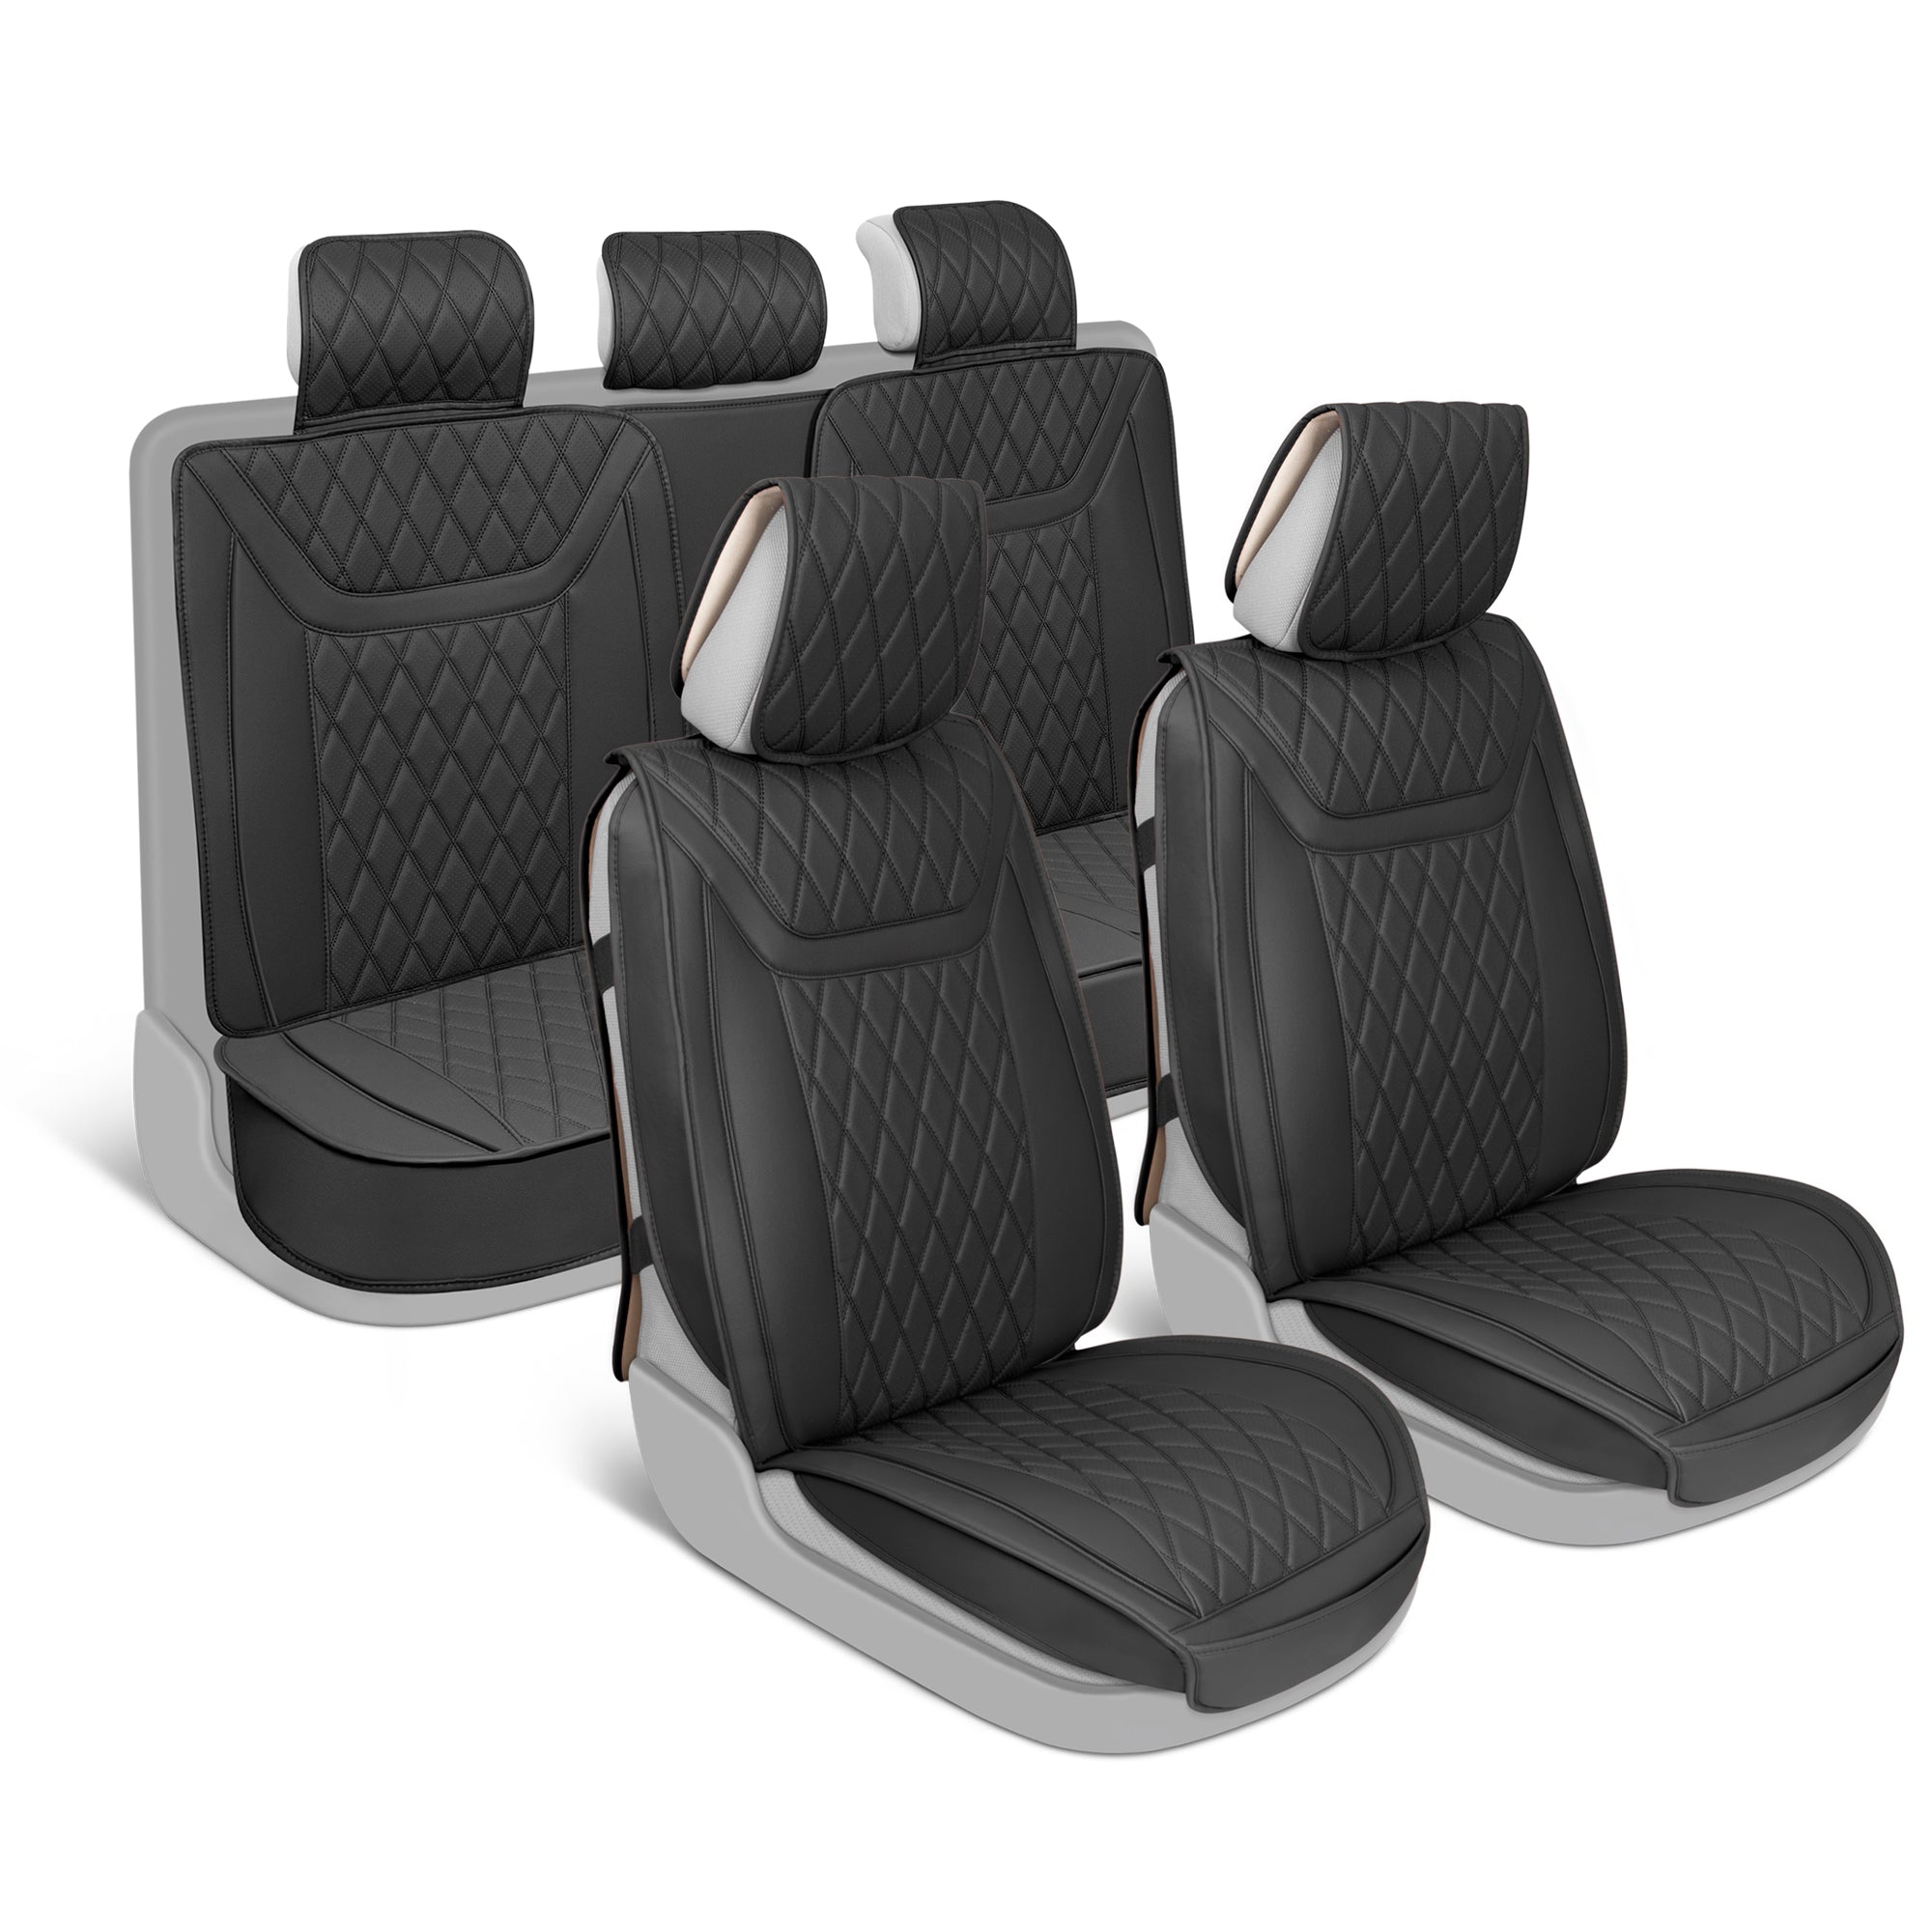 MotorBox Car Seat Covers – Ranch Leatherette Faux Leather Black Seat Covers for Car – Diamond Stitched Cushioned Seat Protectors for Automotive Accessories, Trucks, SUV, Car – Full Set